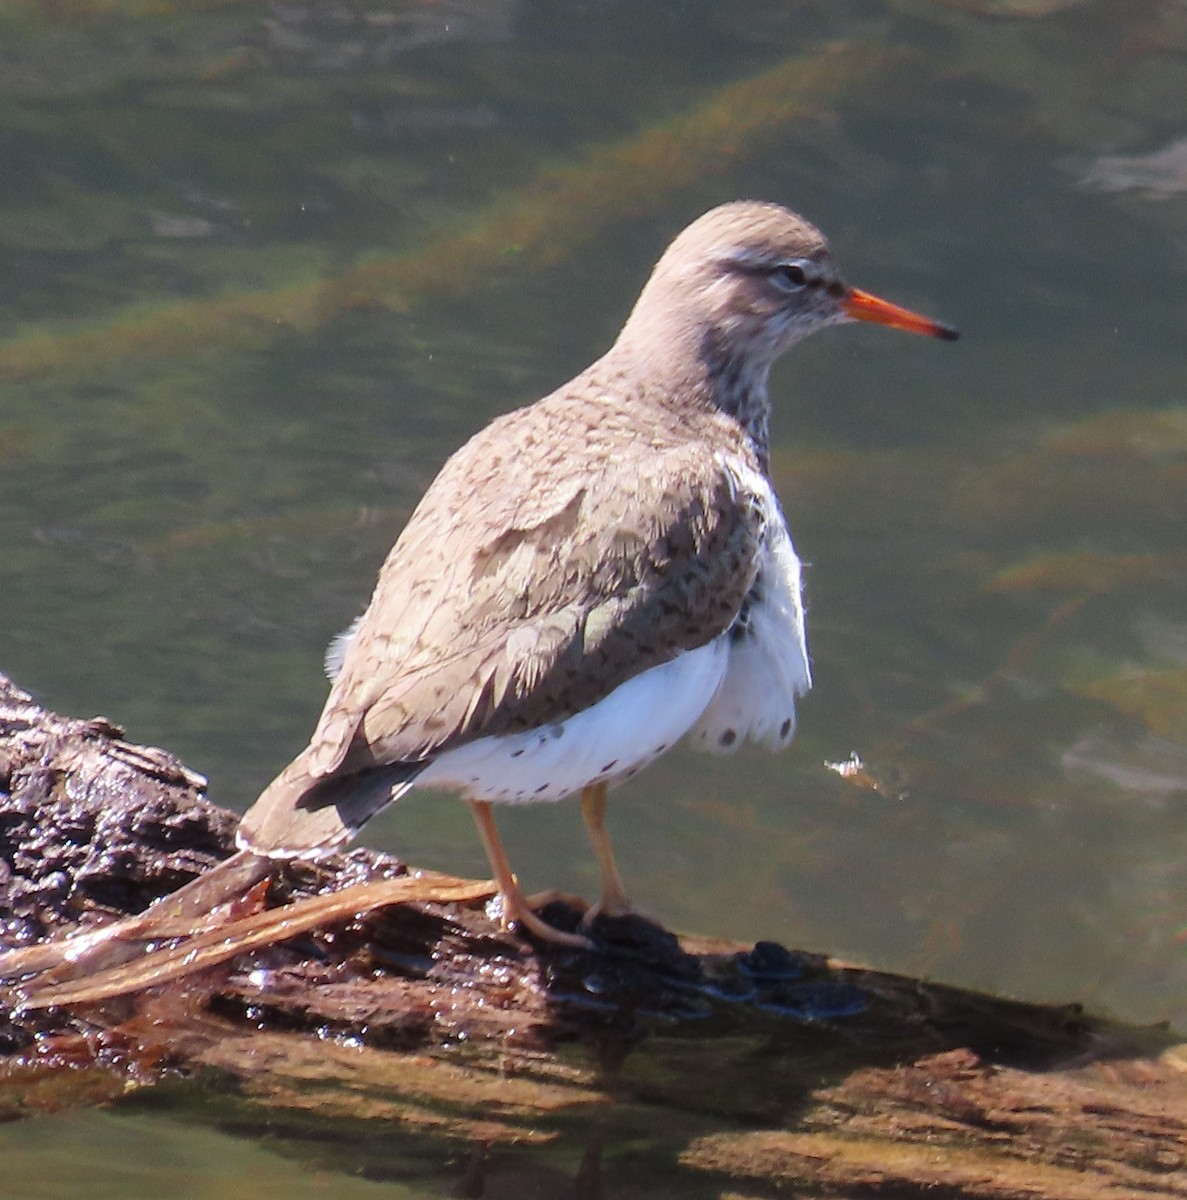 Spotted Sandpiper - The Spotting Twohees